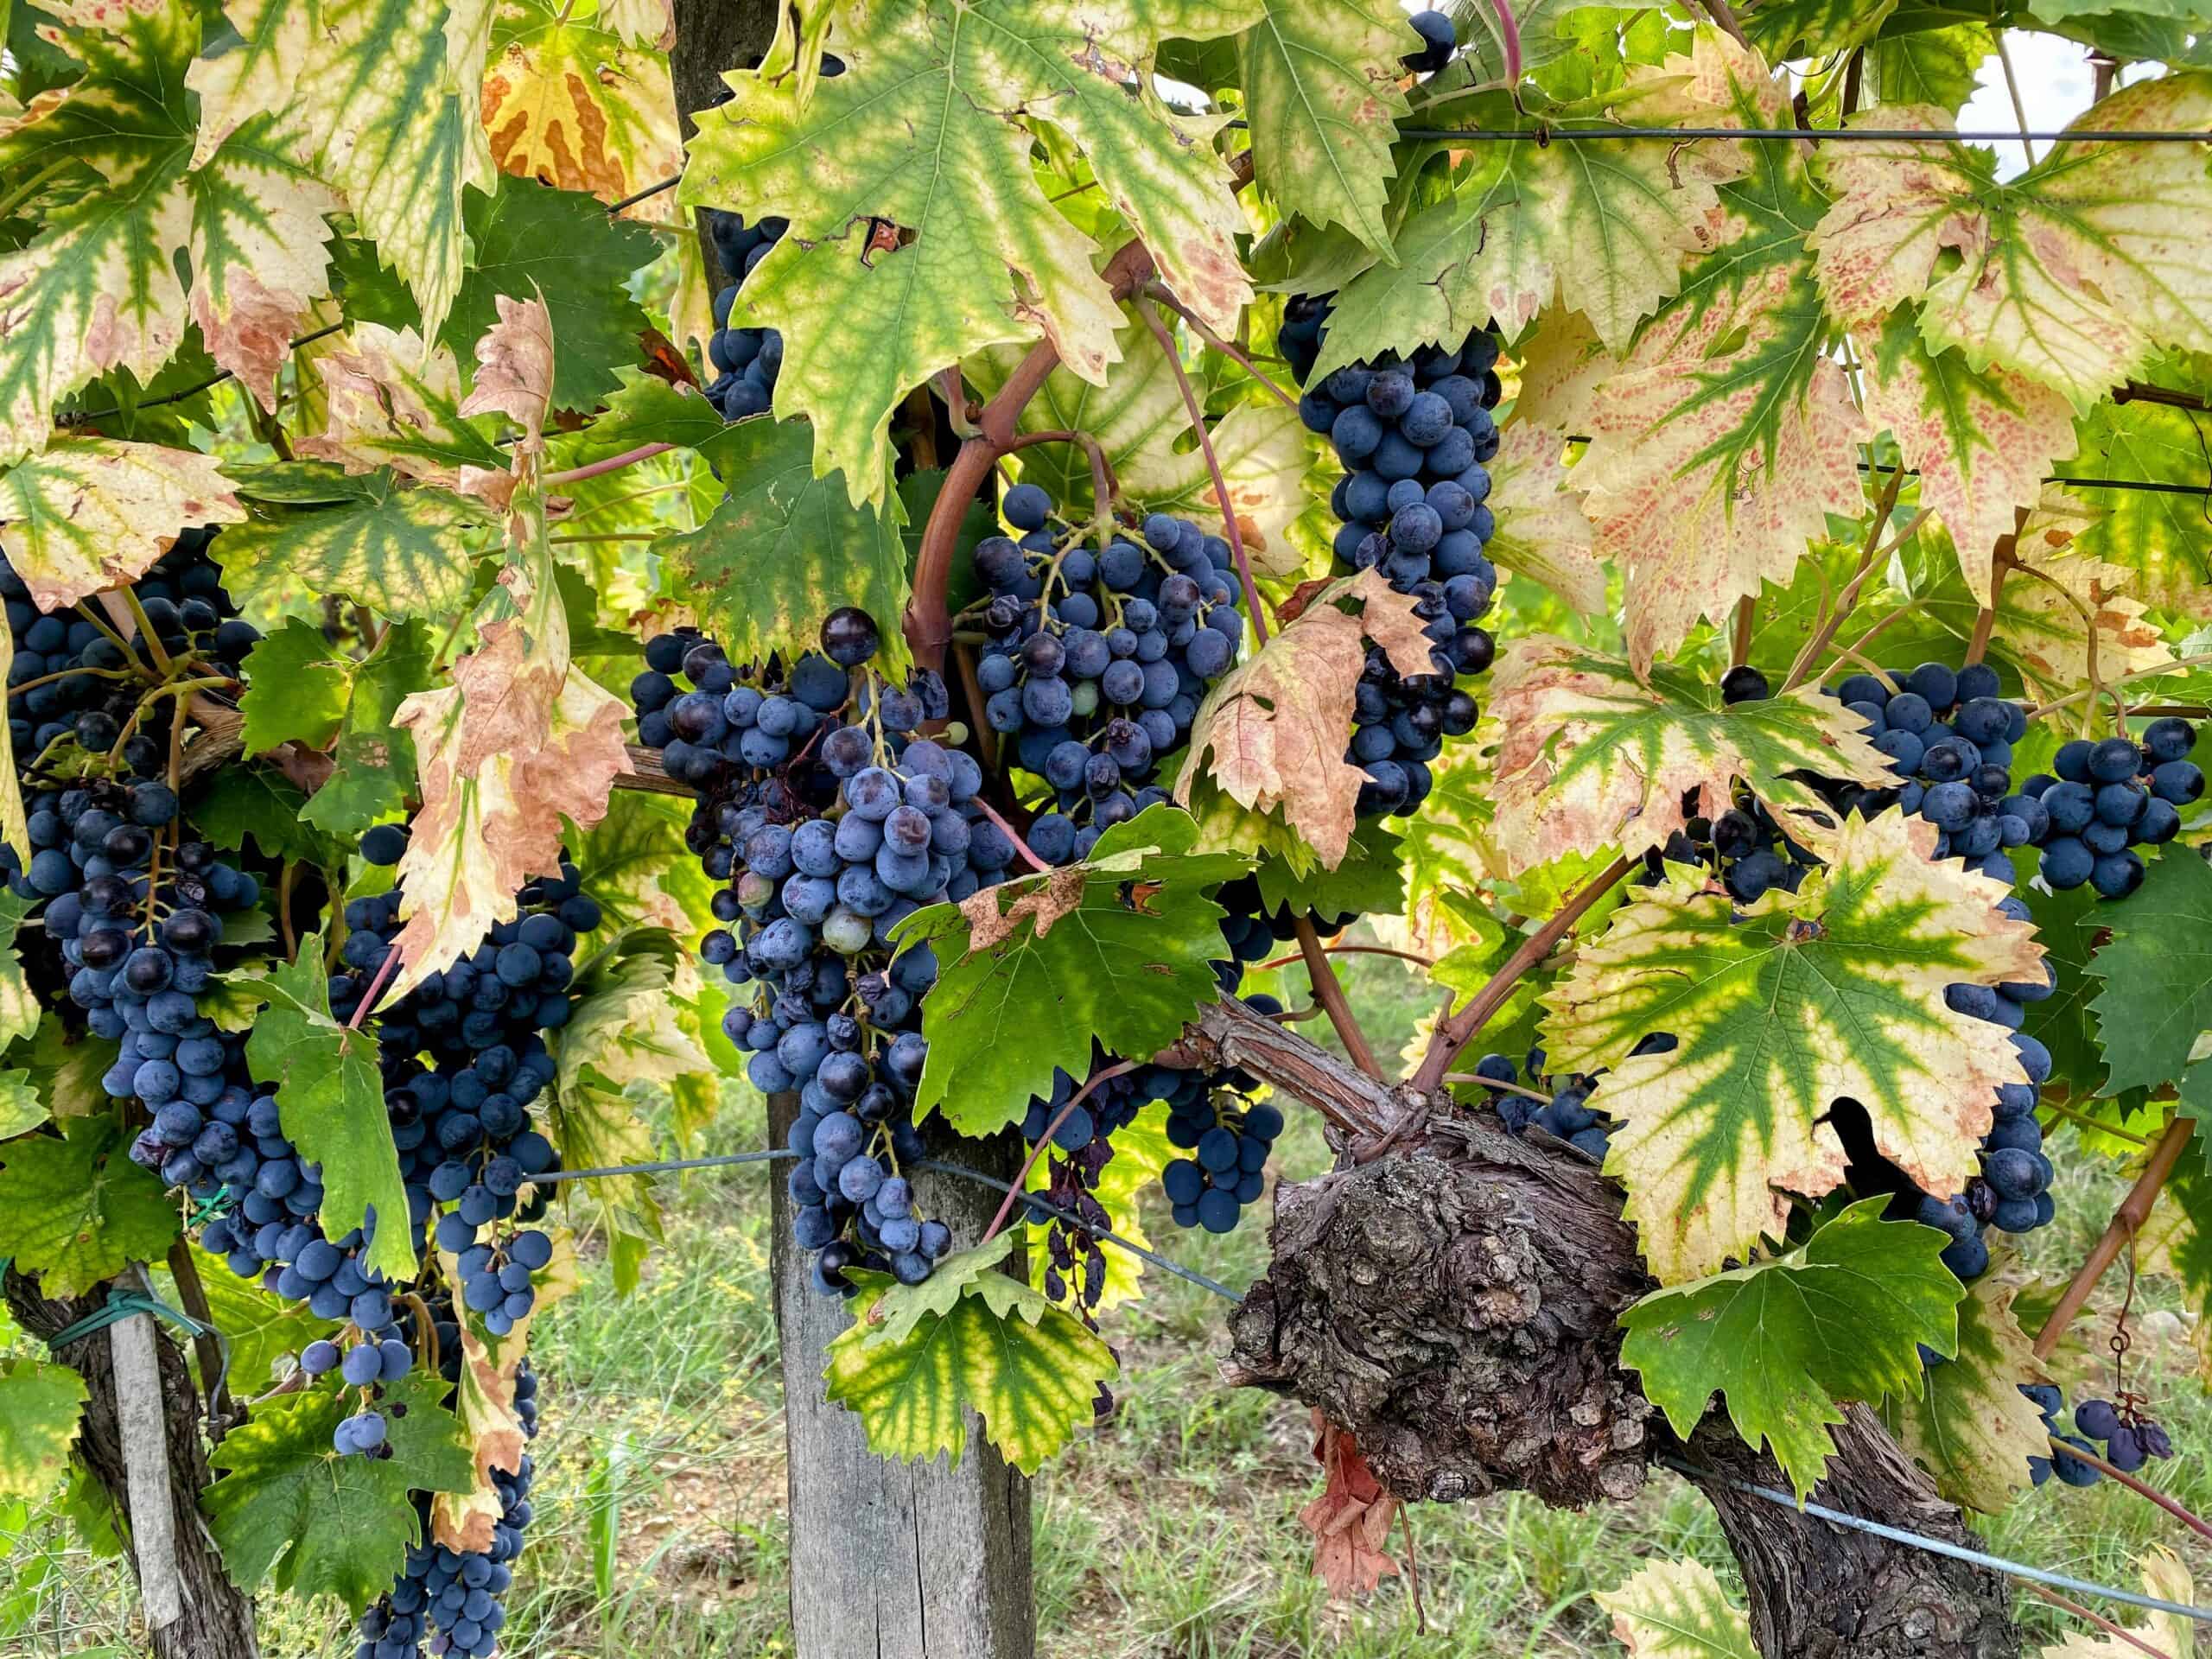 Red grapes on the vine are ready to be harvested in Chianti, Tuscany, Italy.